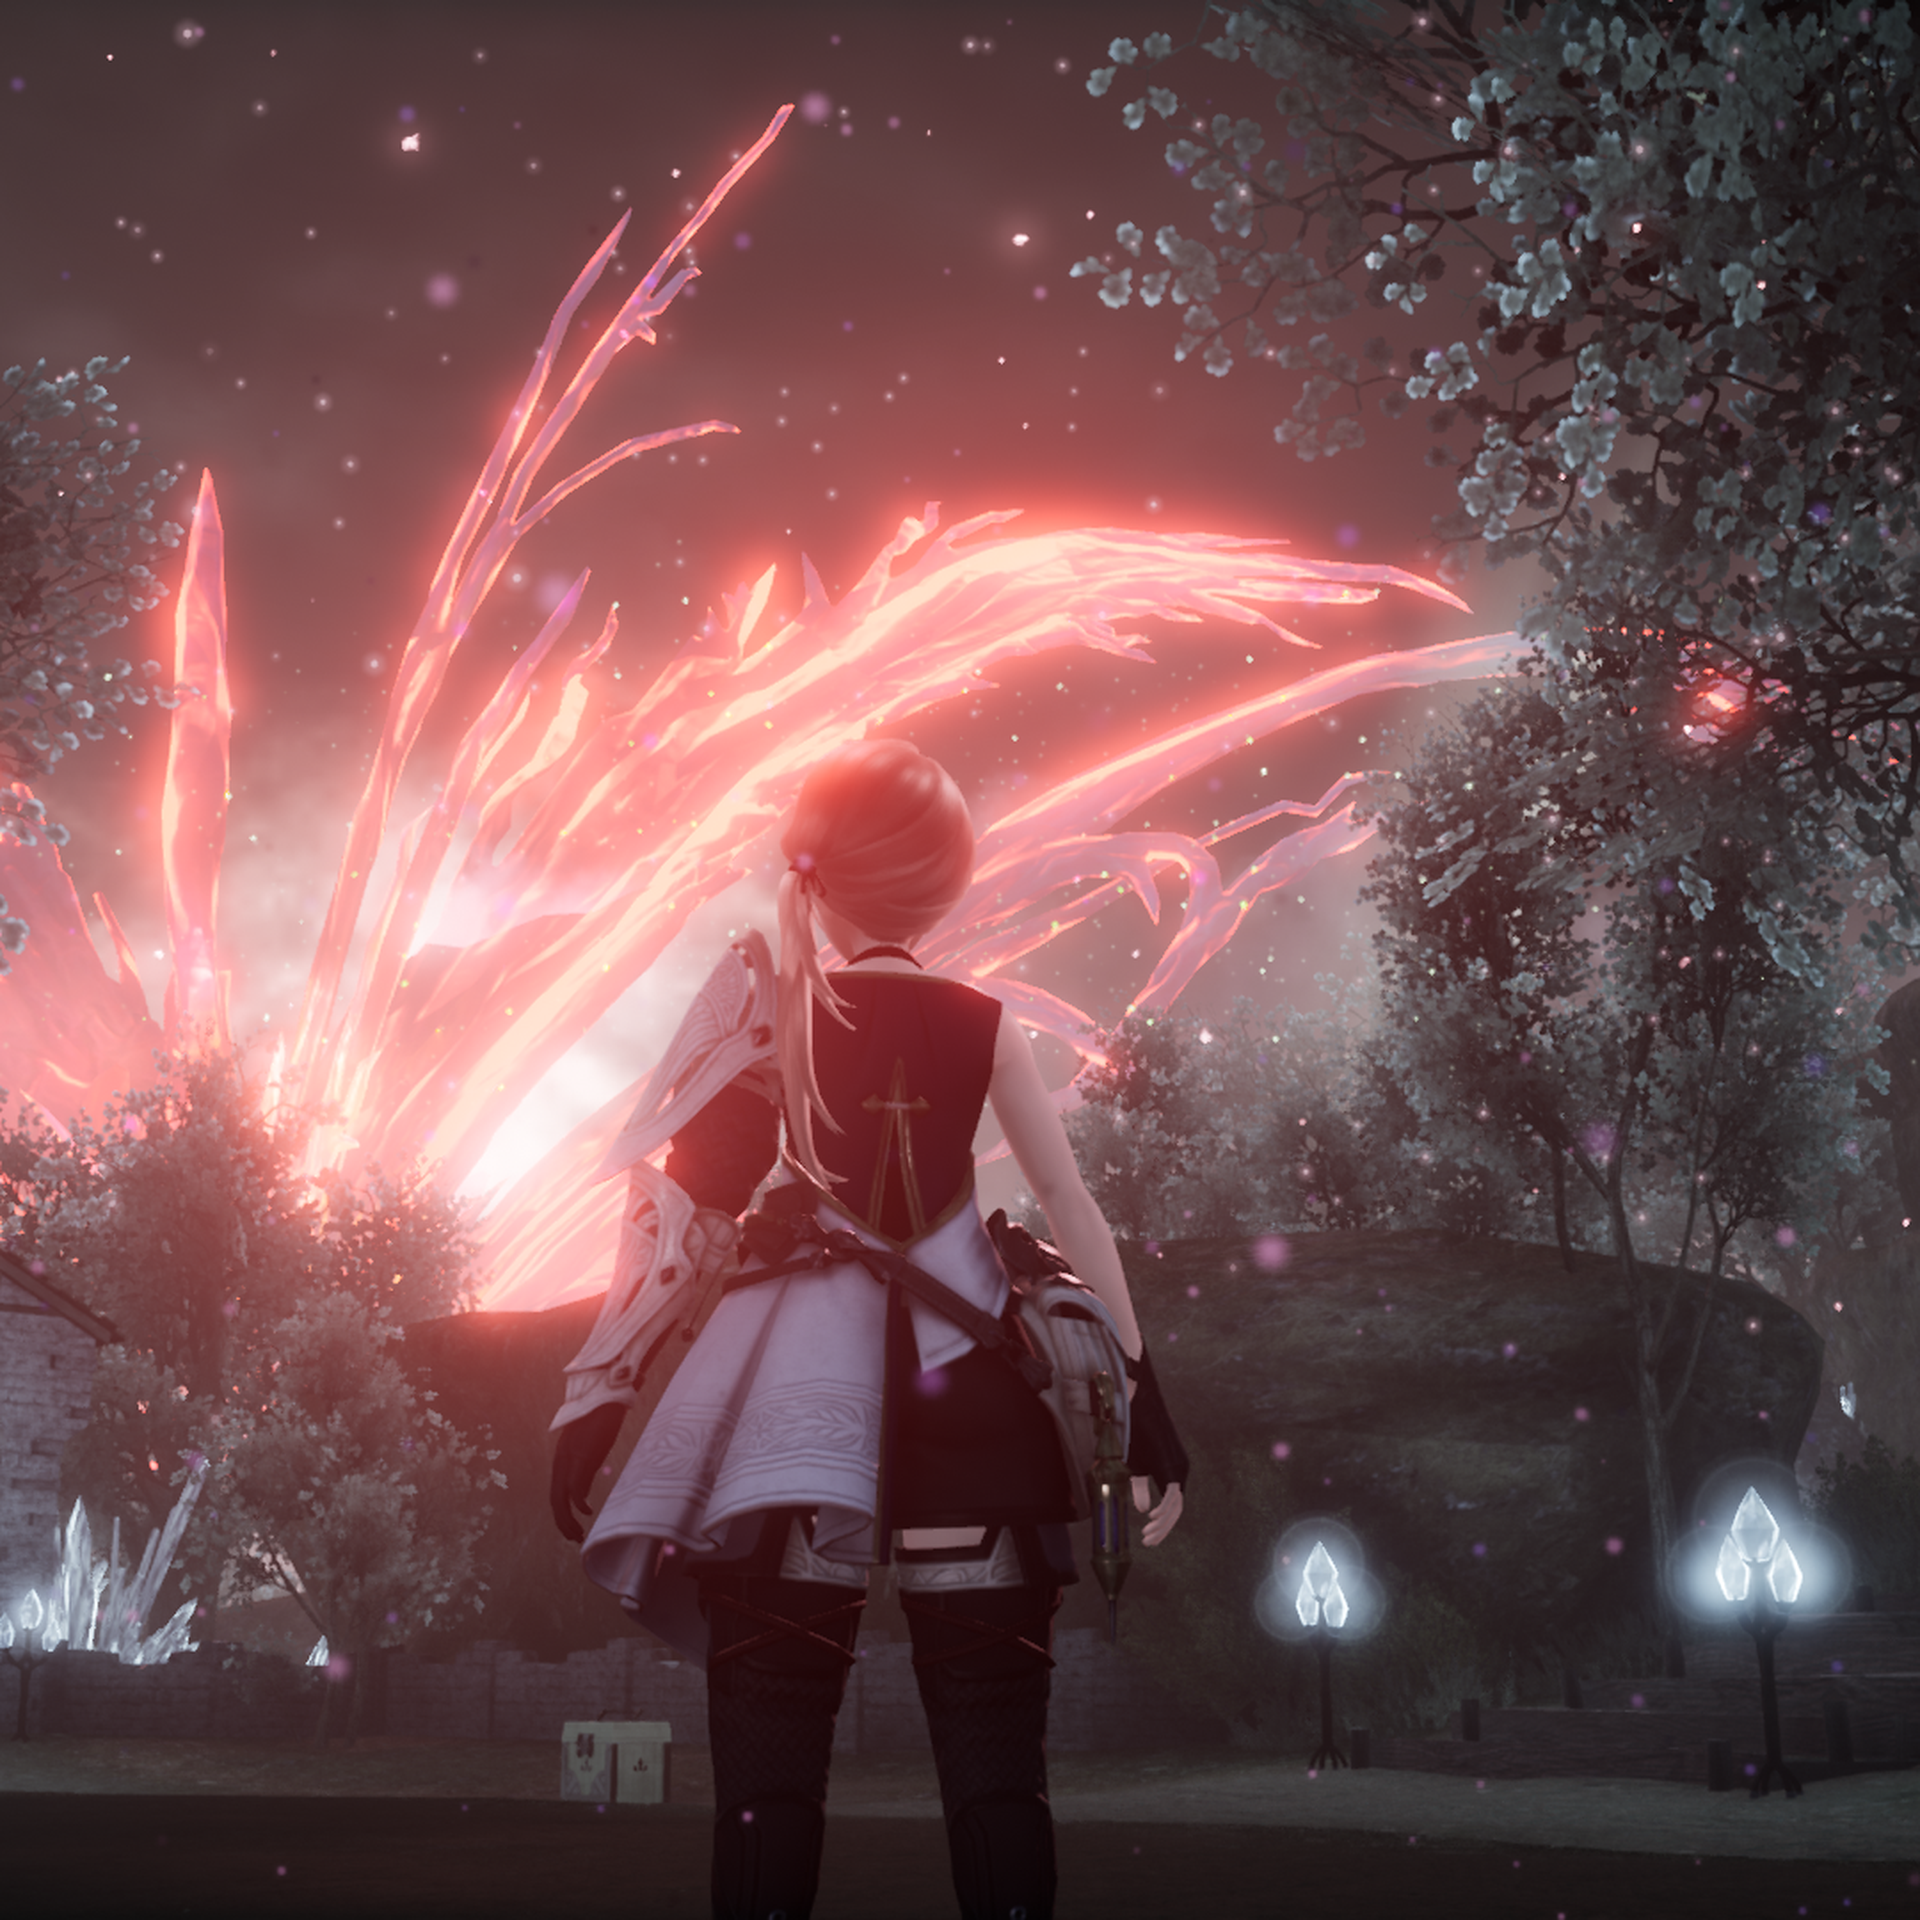 Video game screenshot of a person in a medieval-style village at night, while large magical red flames shoot into the sky